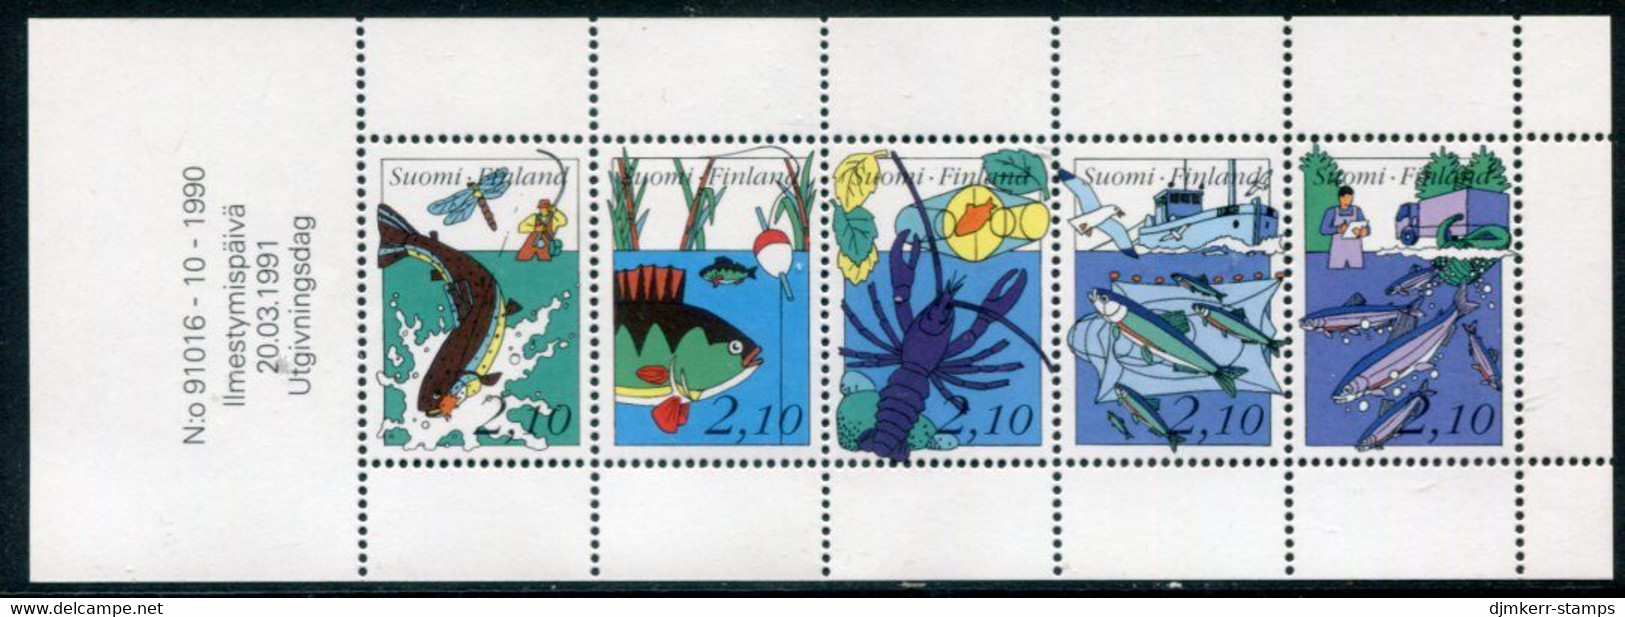 FINLAND 1991 Centenary Of Fisheries Organisation  MNH / **.  Michel 1134-38 - Unused Stamps